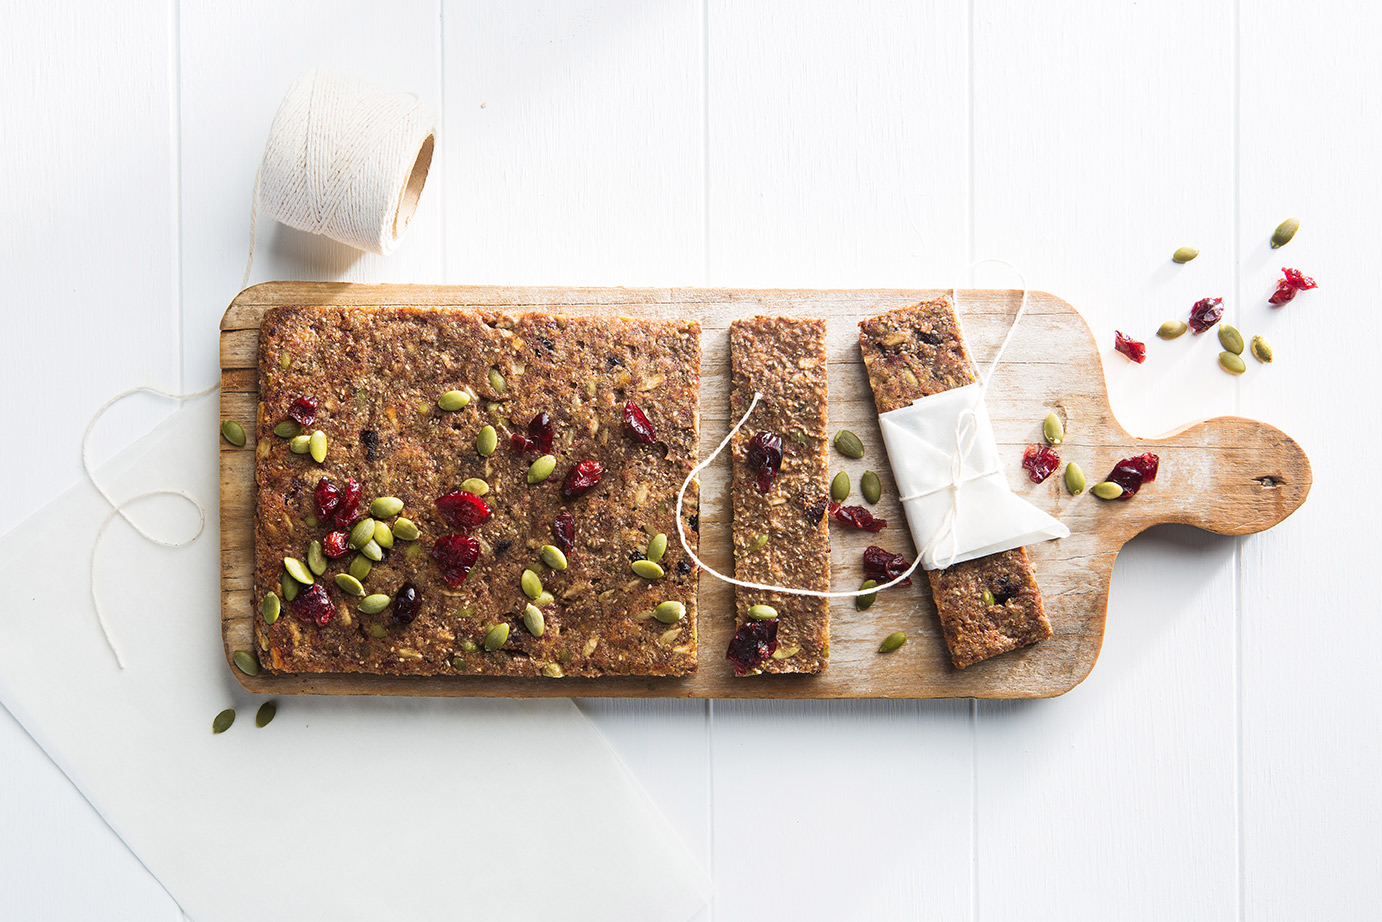 Image of a block of baked chewy nut and seeds bars ready to be sliced on a wooden chopping board.